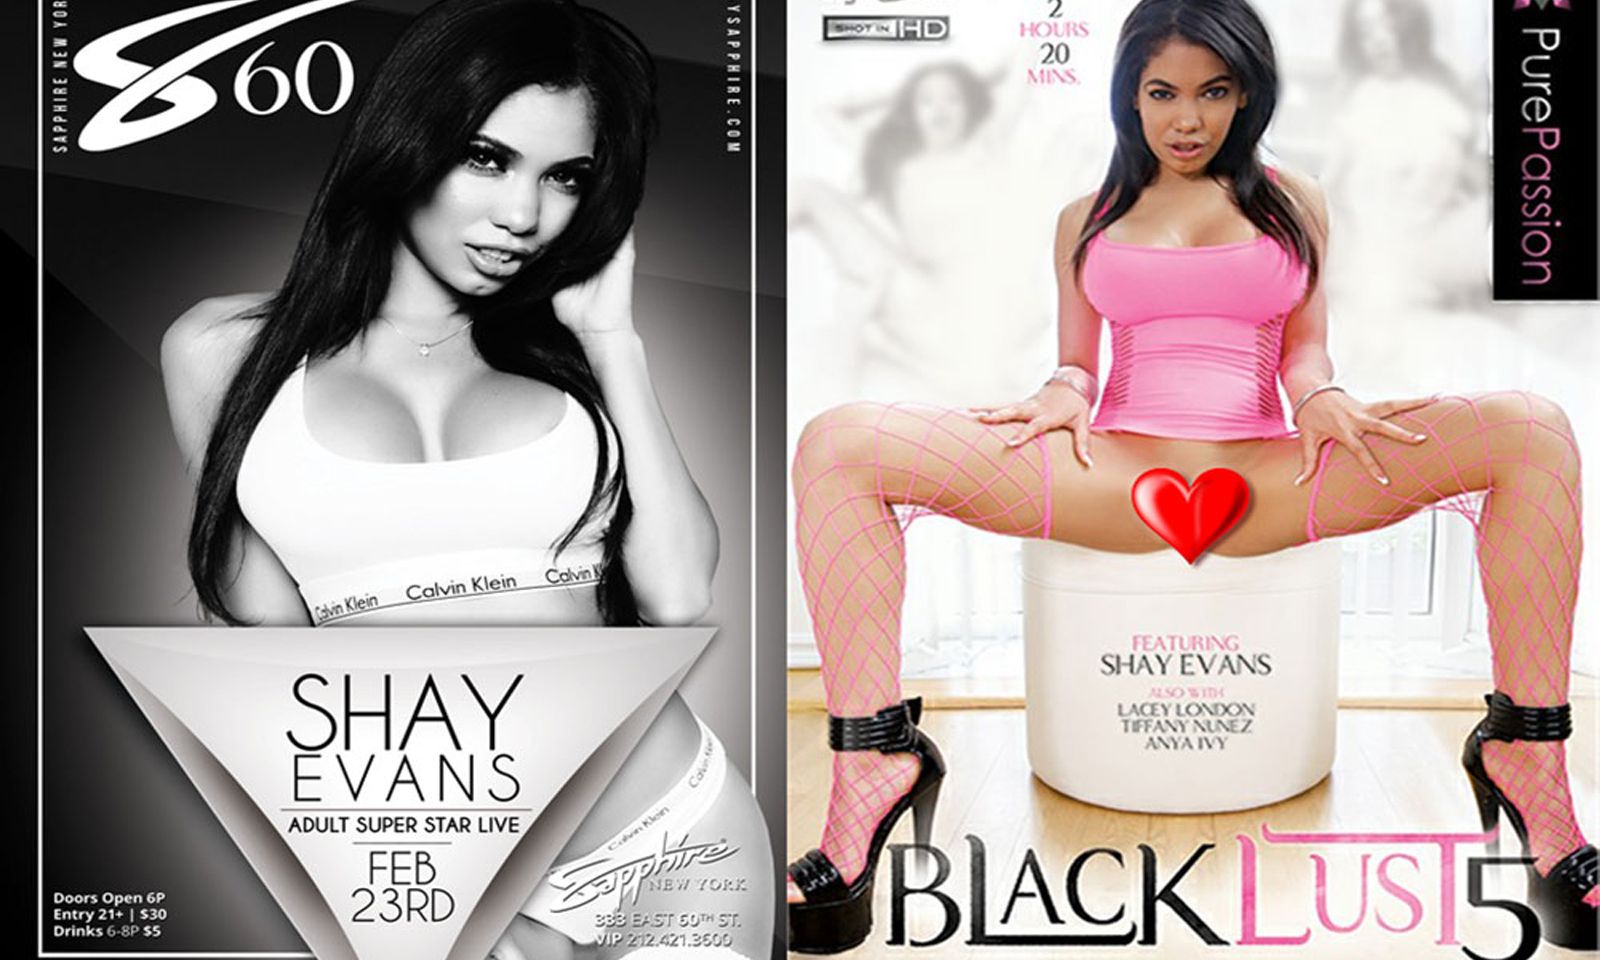 Shay Evans is Stunning on New ‘Black Lust 5’ Box Cover